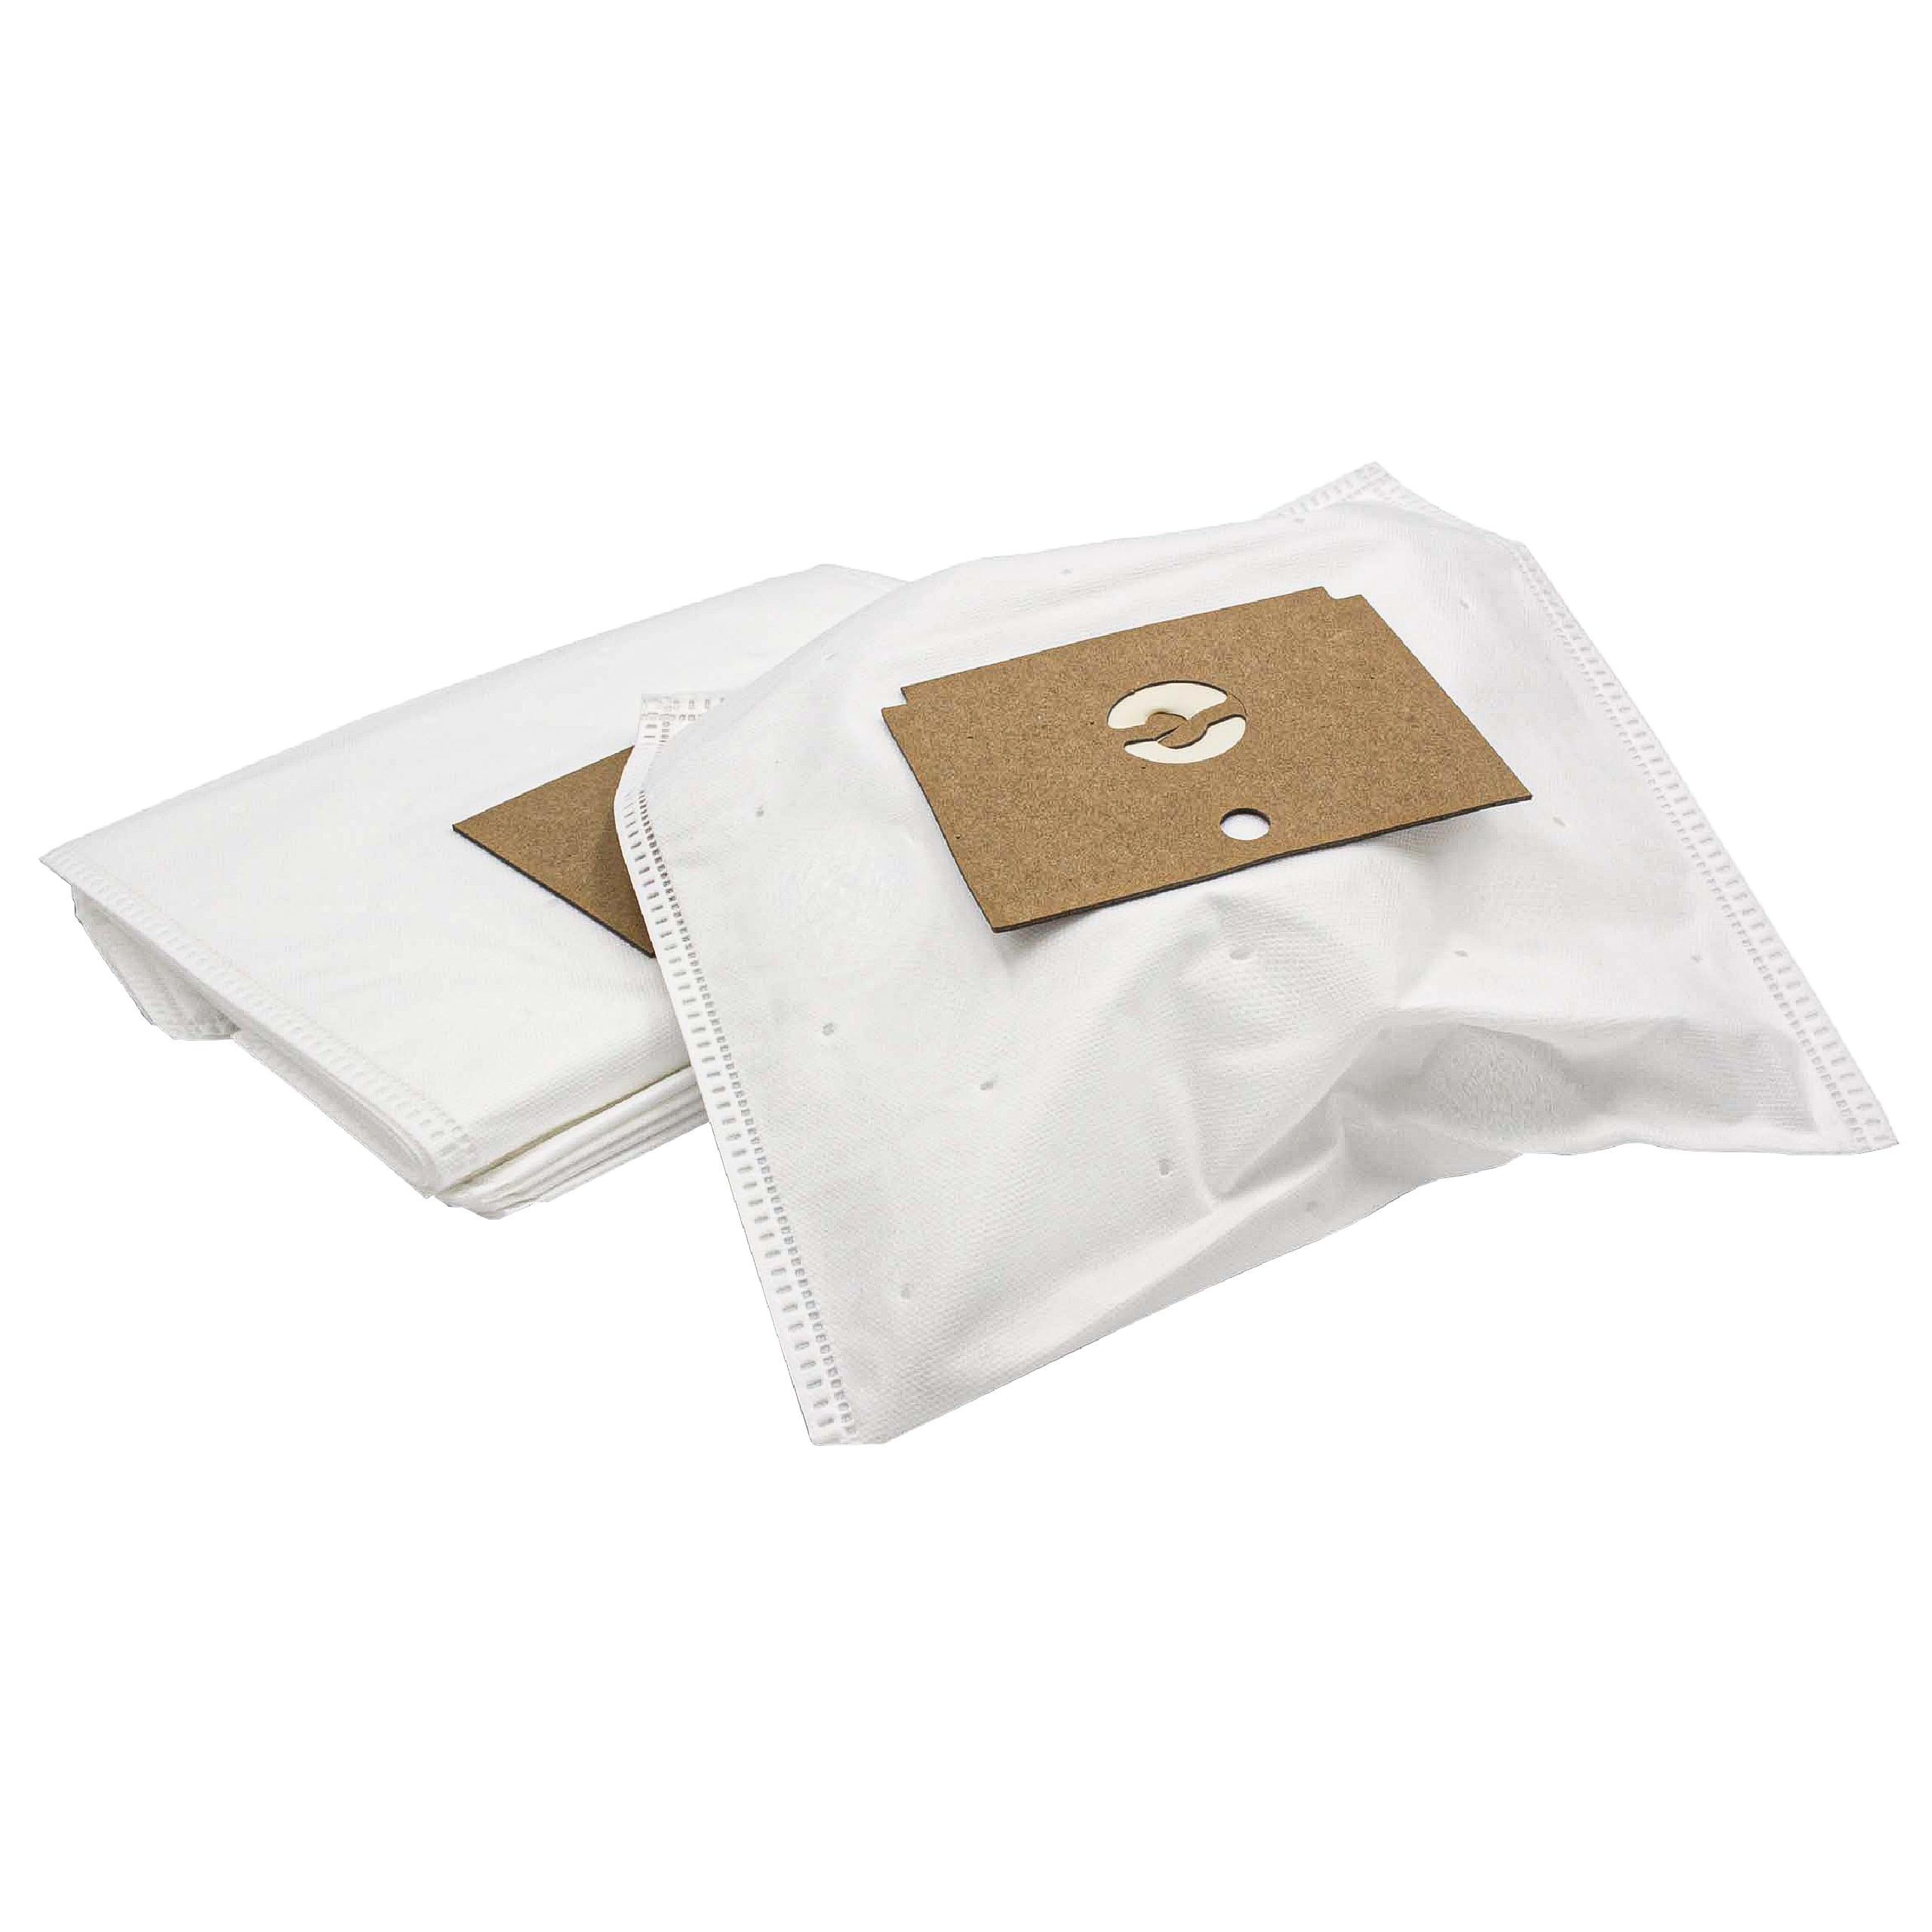 10x Vacuum Cleaner Bag replaces Rowenta ZR745, ZR74 for Tefal - microfleece